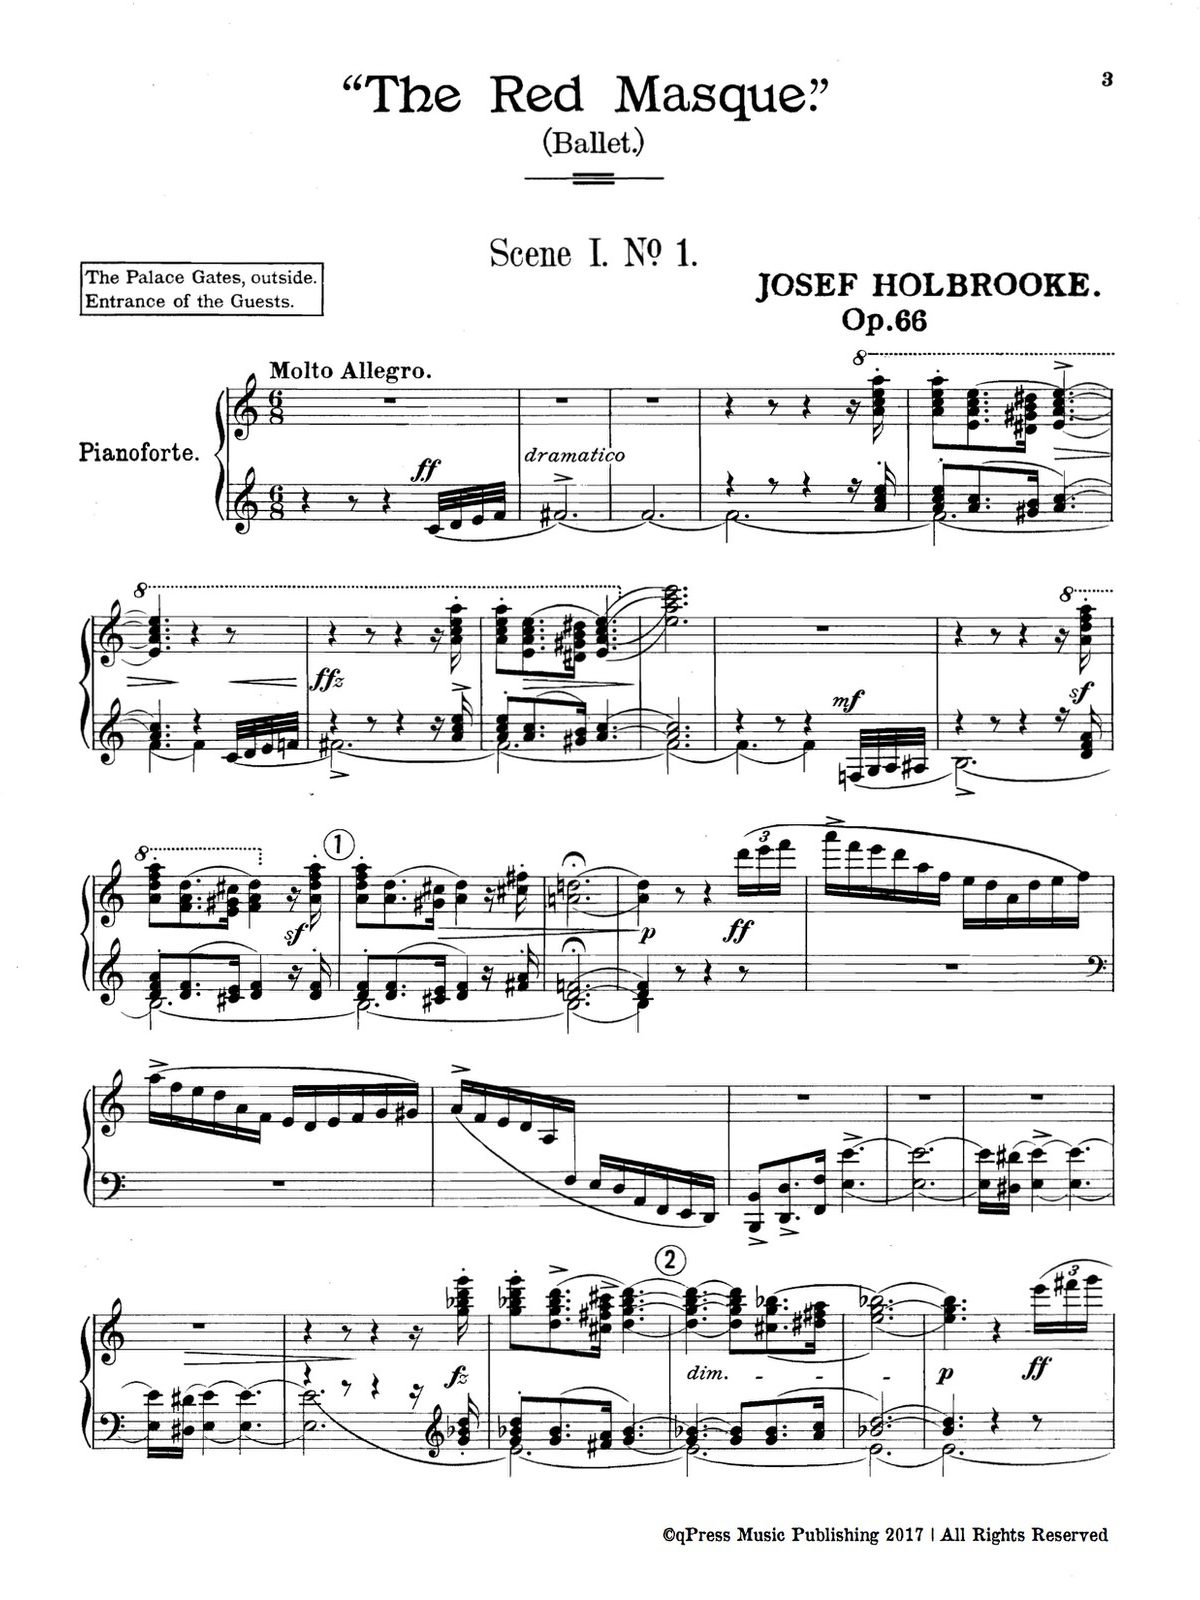 Holbrooke, The Red Masque, Op.66 for Piano-p03